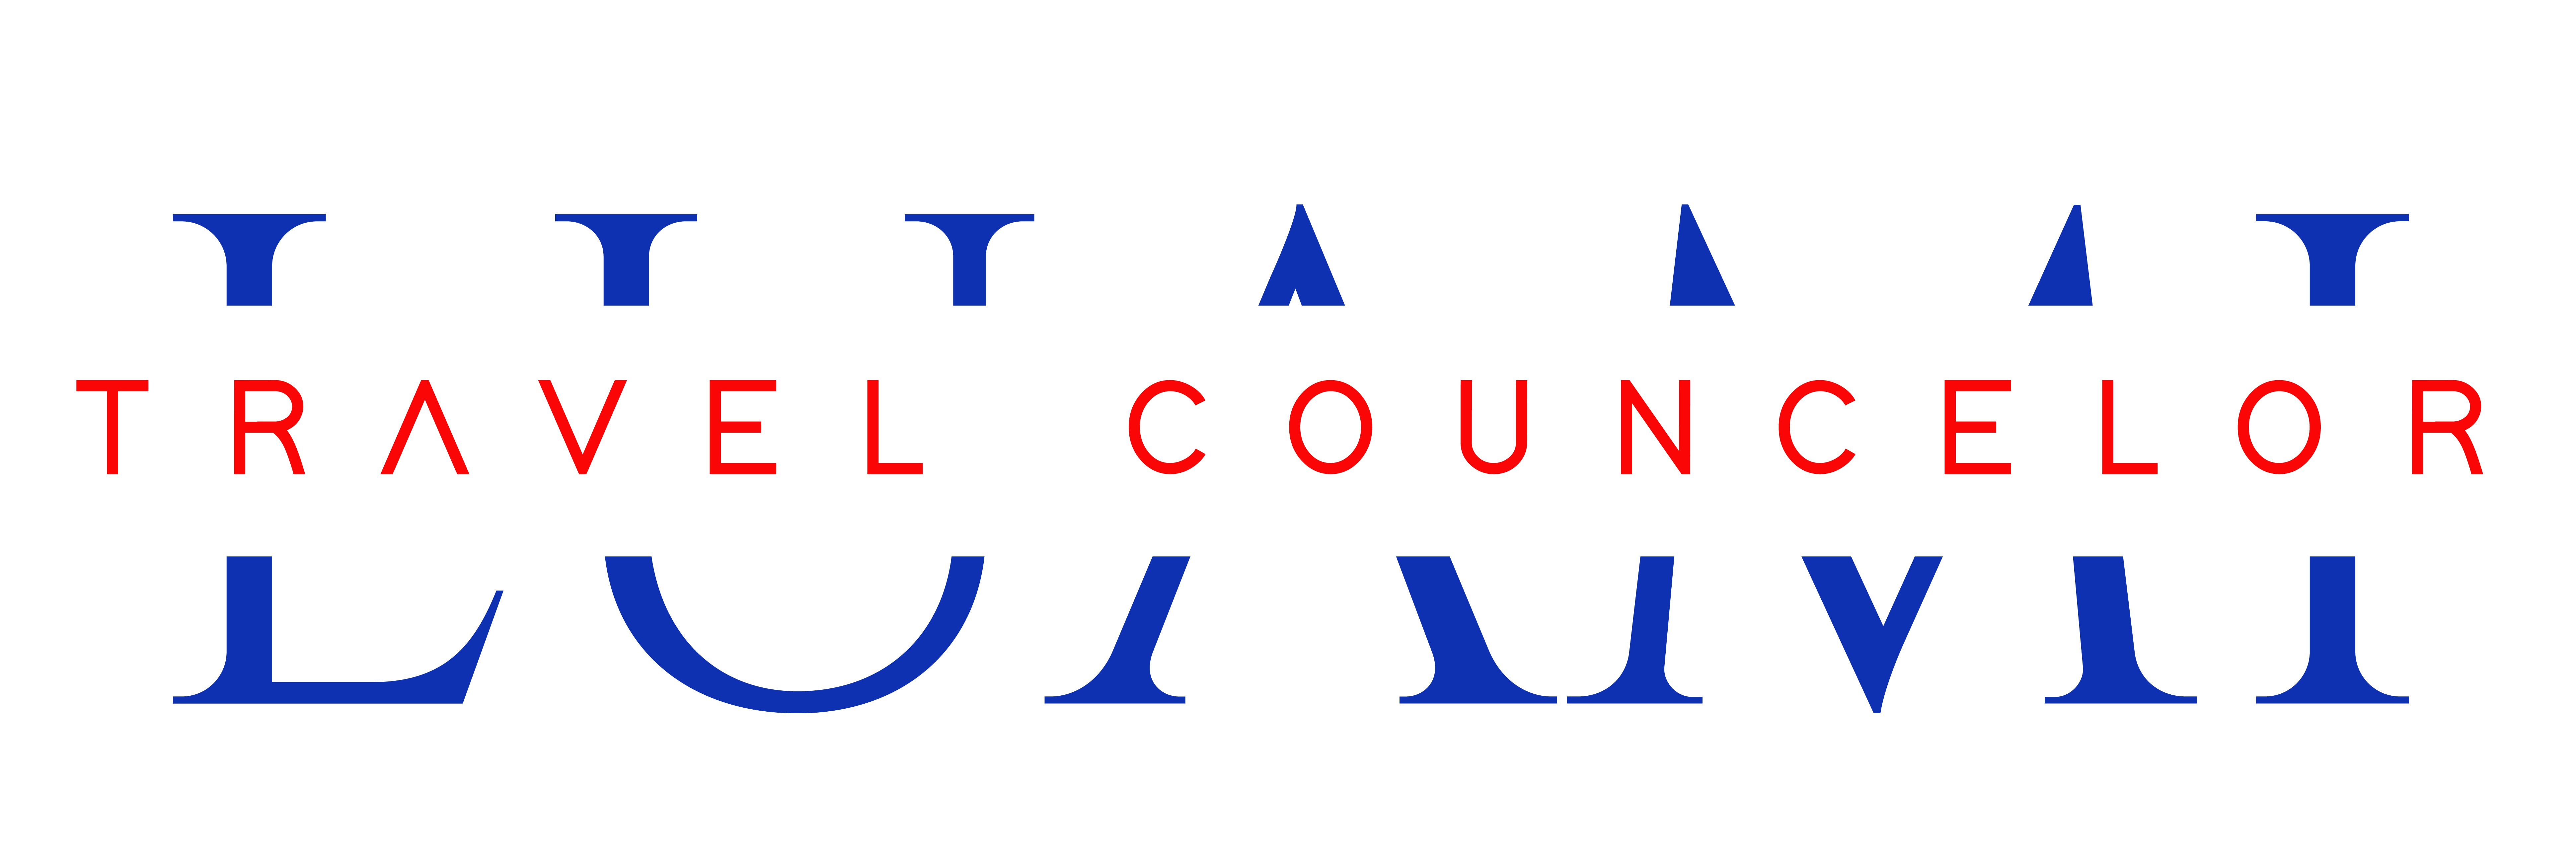 LUAMI TRAVEL COUNSELOR